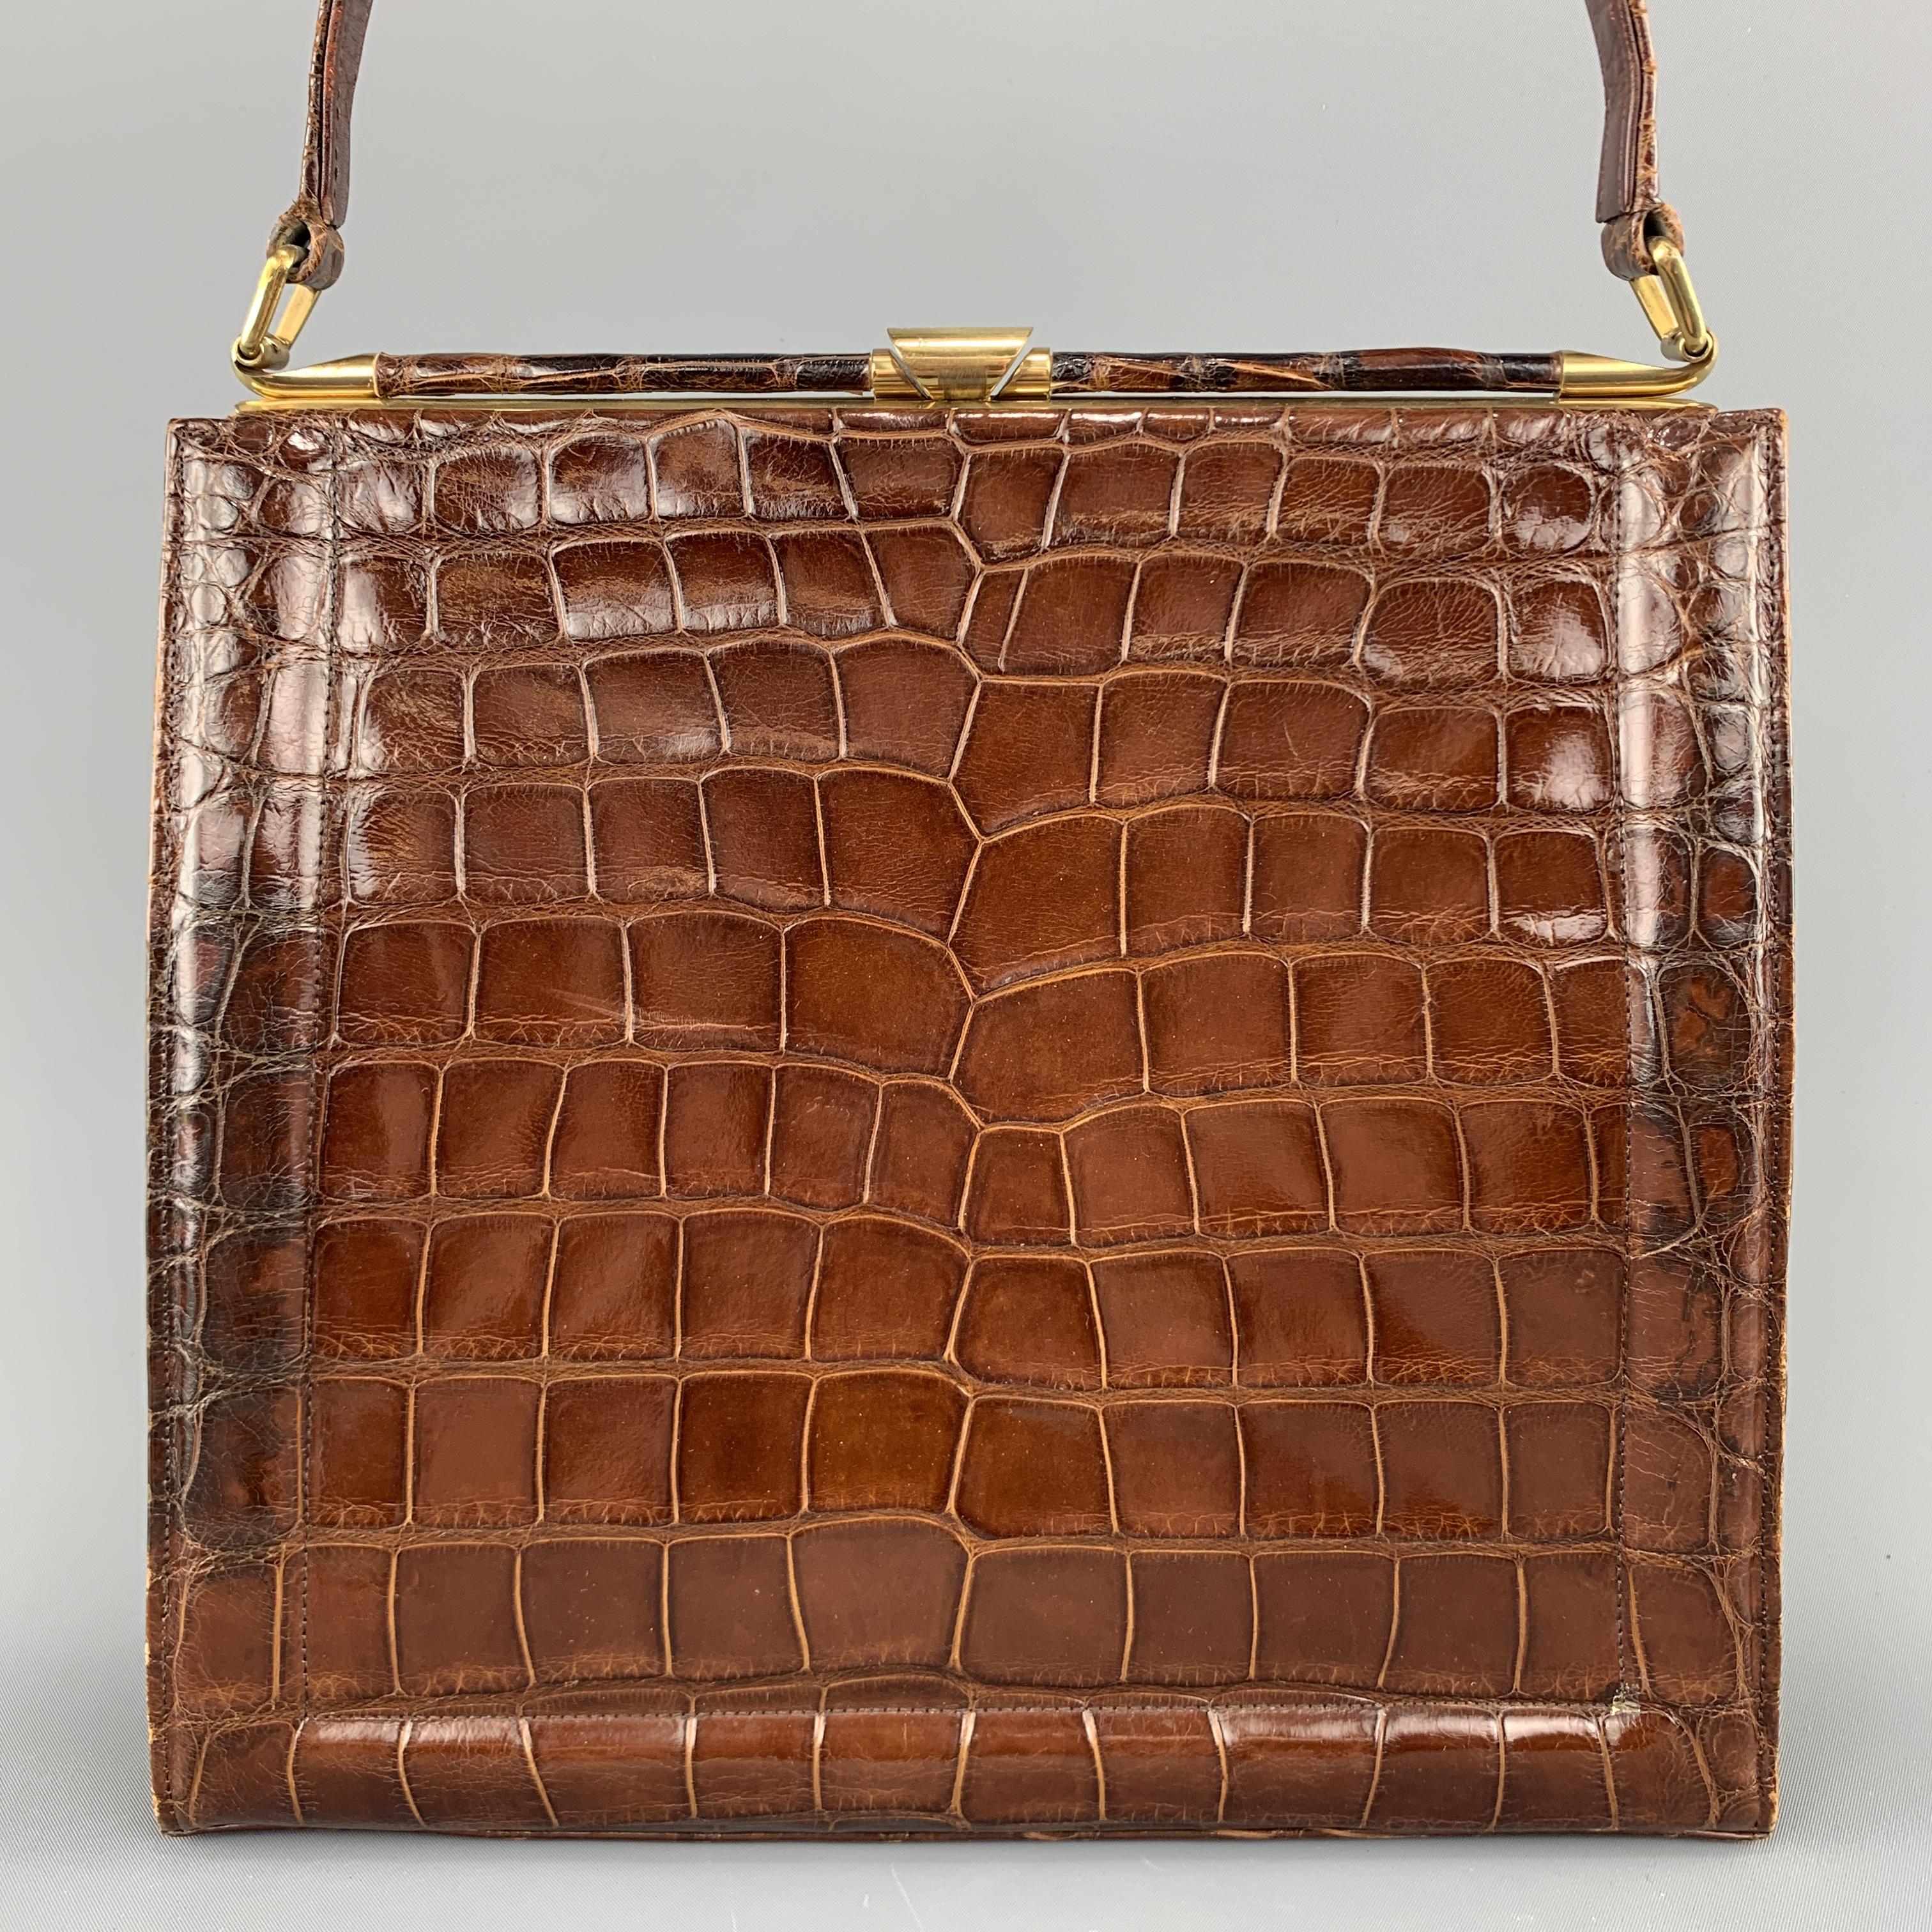 Vintage 50's-60's DEITSCH handbag comes in brown alligator skin leather with a single strap and gold tone brass closure.
 
Very Good Pre-Owned Condition.
 
Measurements:
 
Length: 11 in.
Width: 2.5 in.
Height: 10 in.
Drop: 6.5 in.